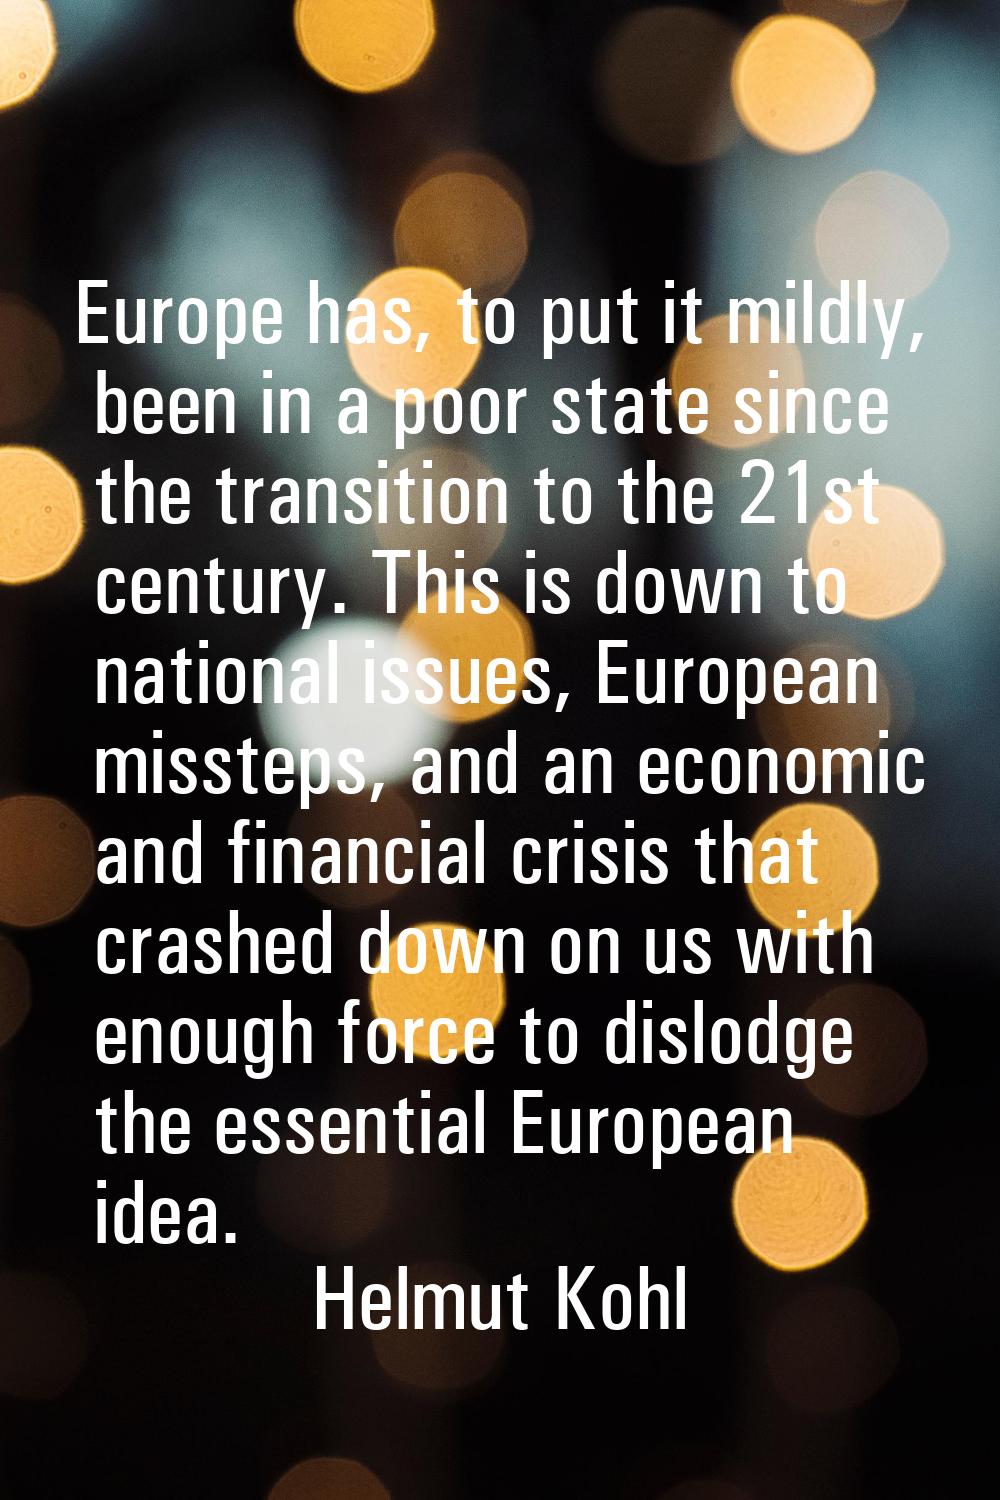 Europe has, to put it mildly, been in a poor state since the transition to the 21st century. This i